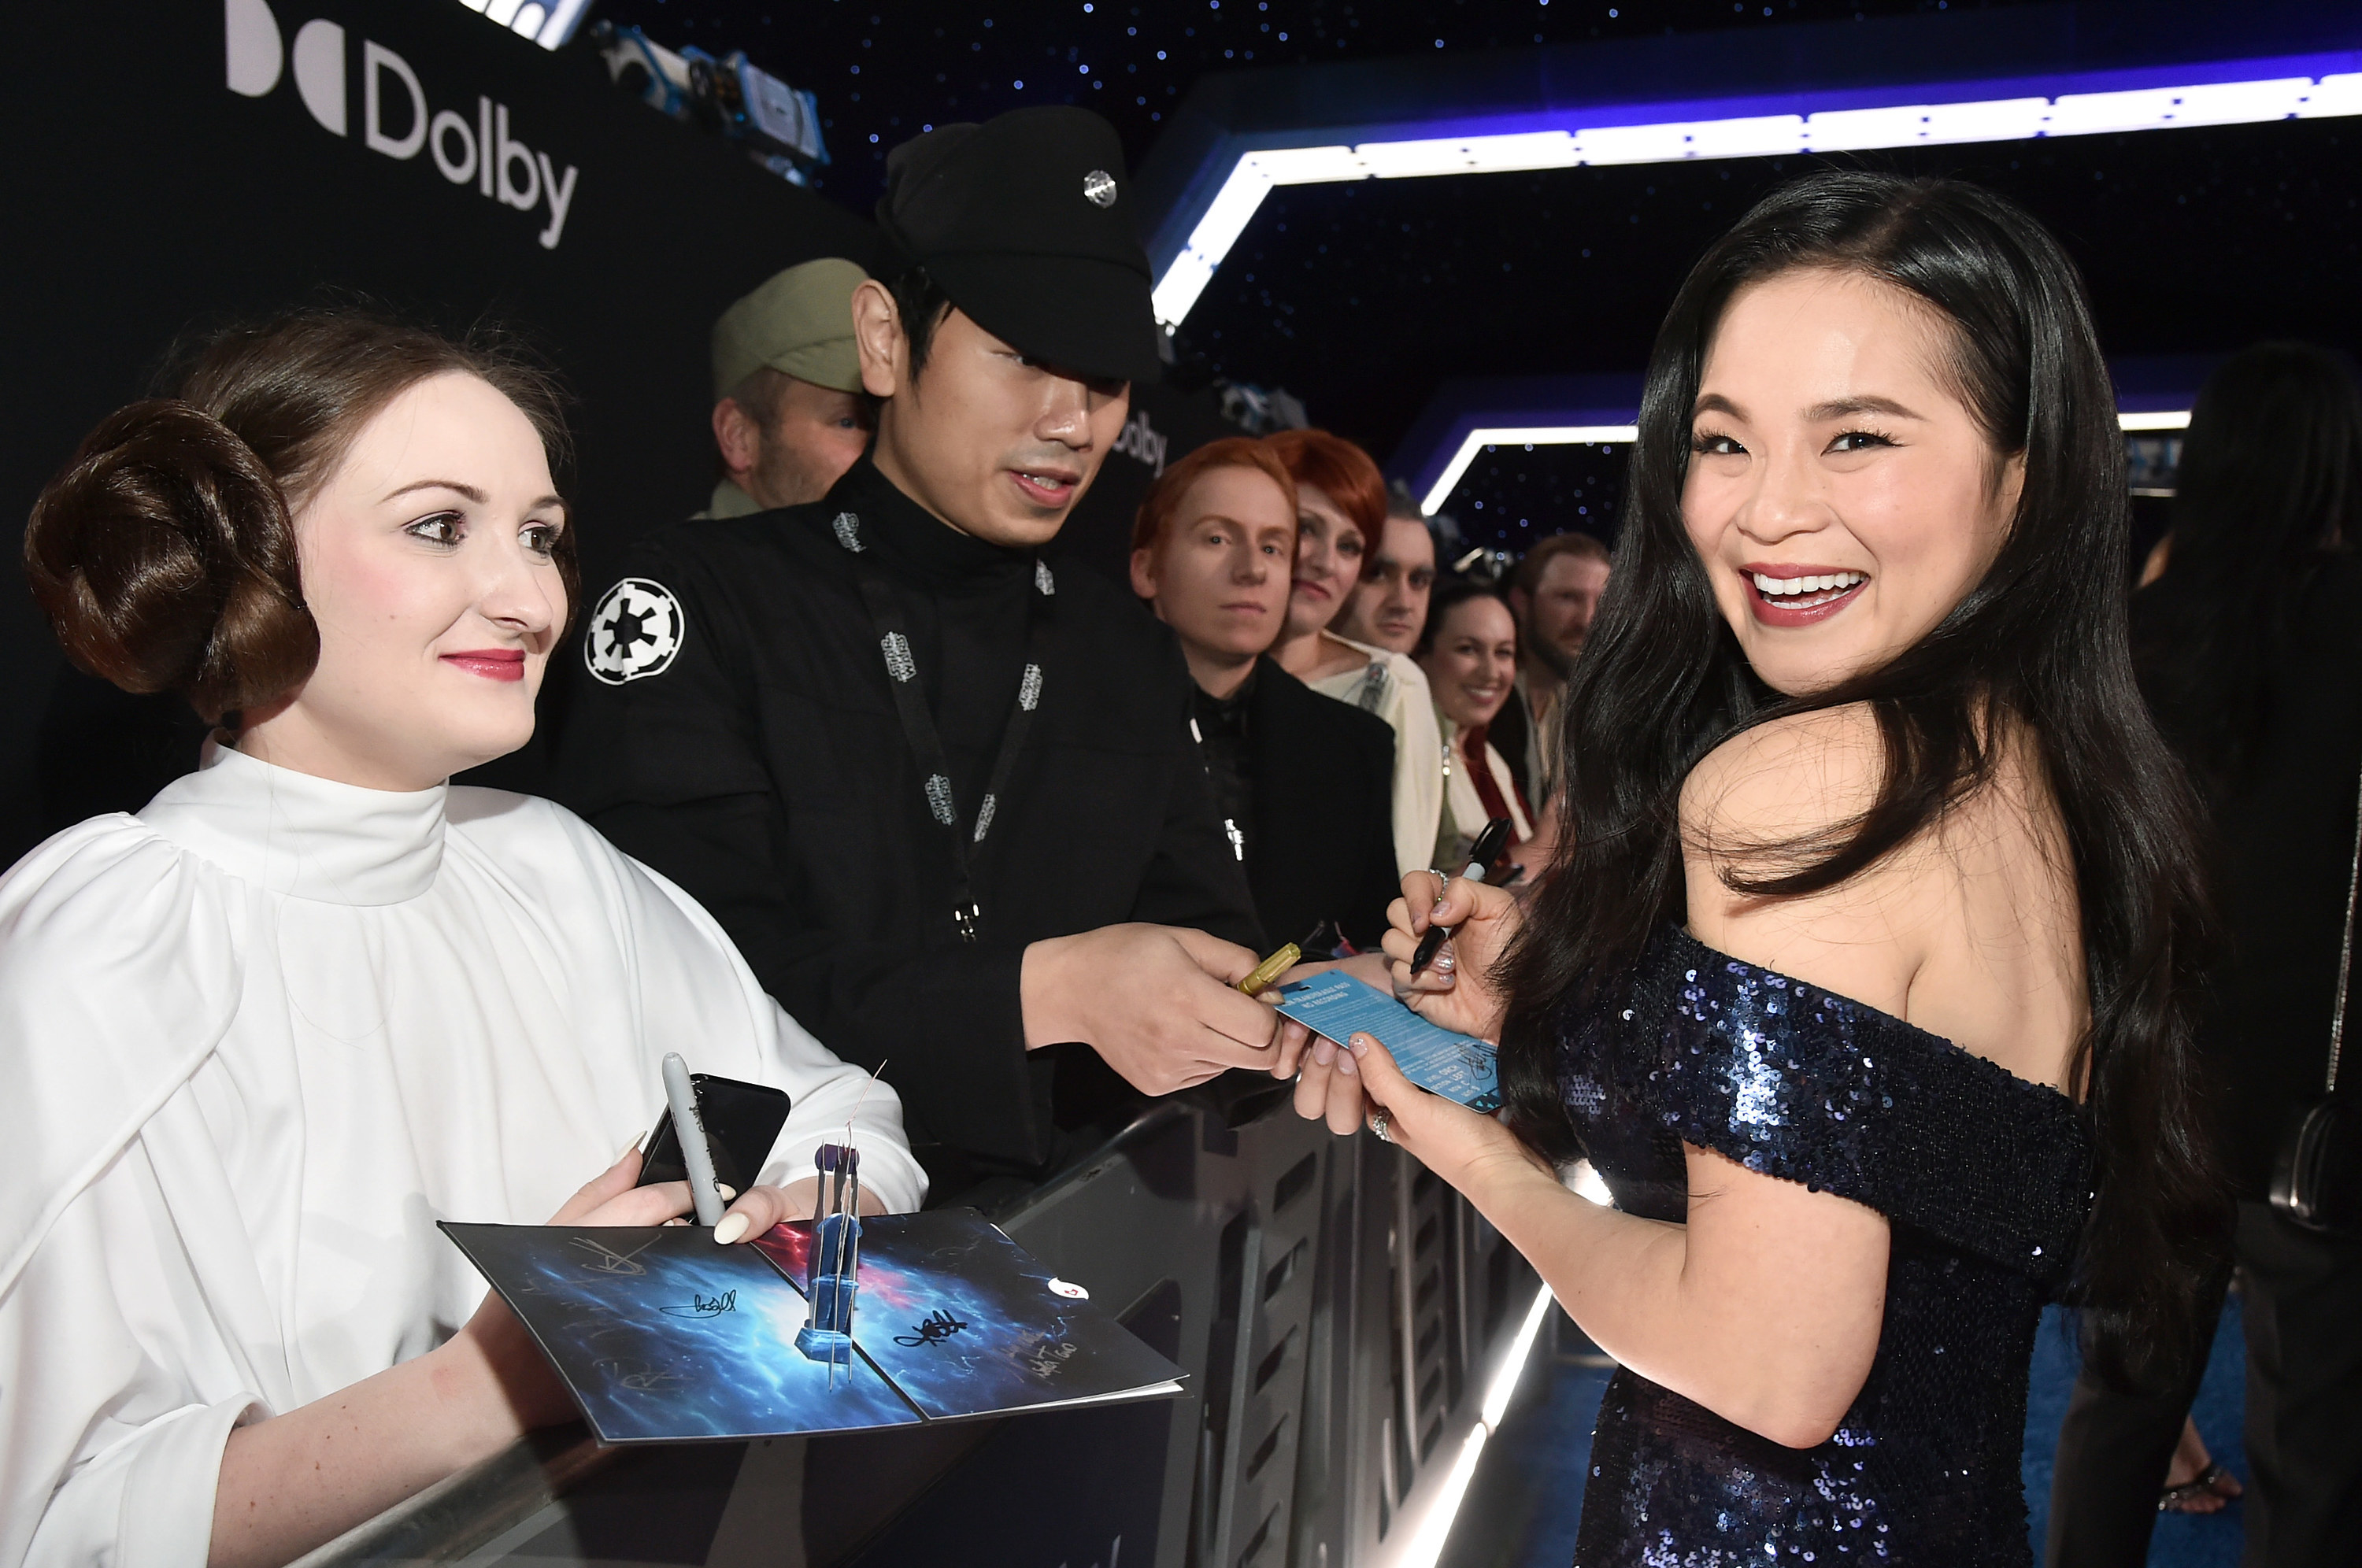 Kelly Marie Tran on the red carpet